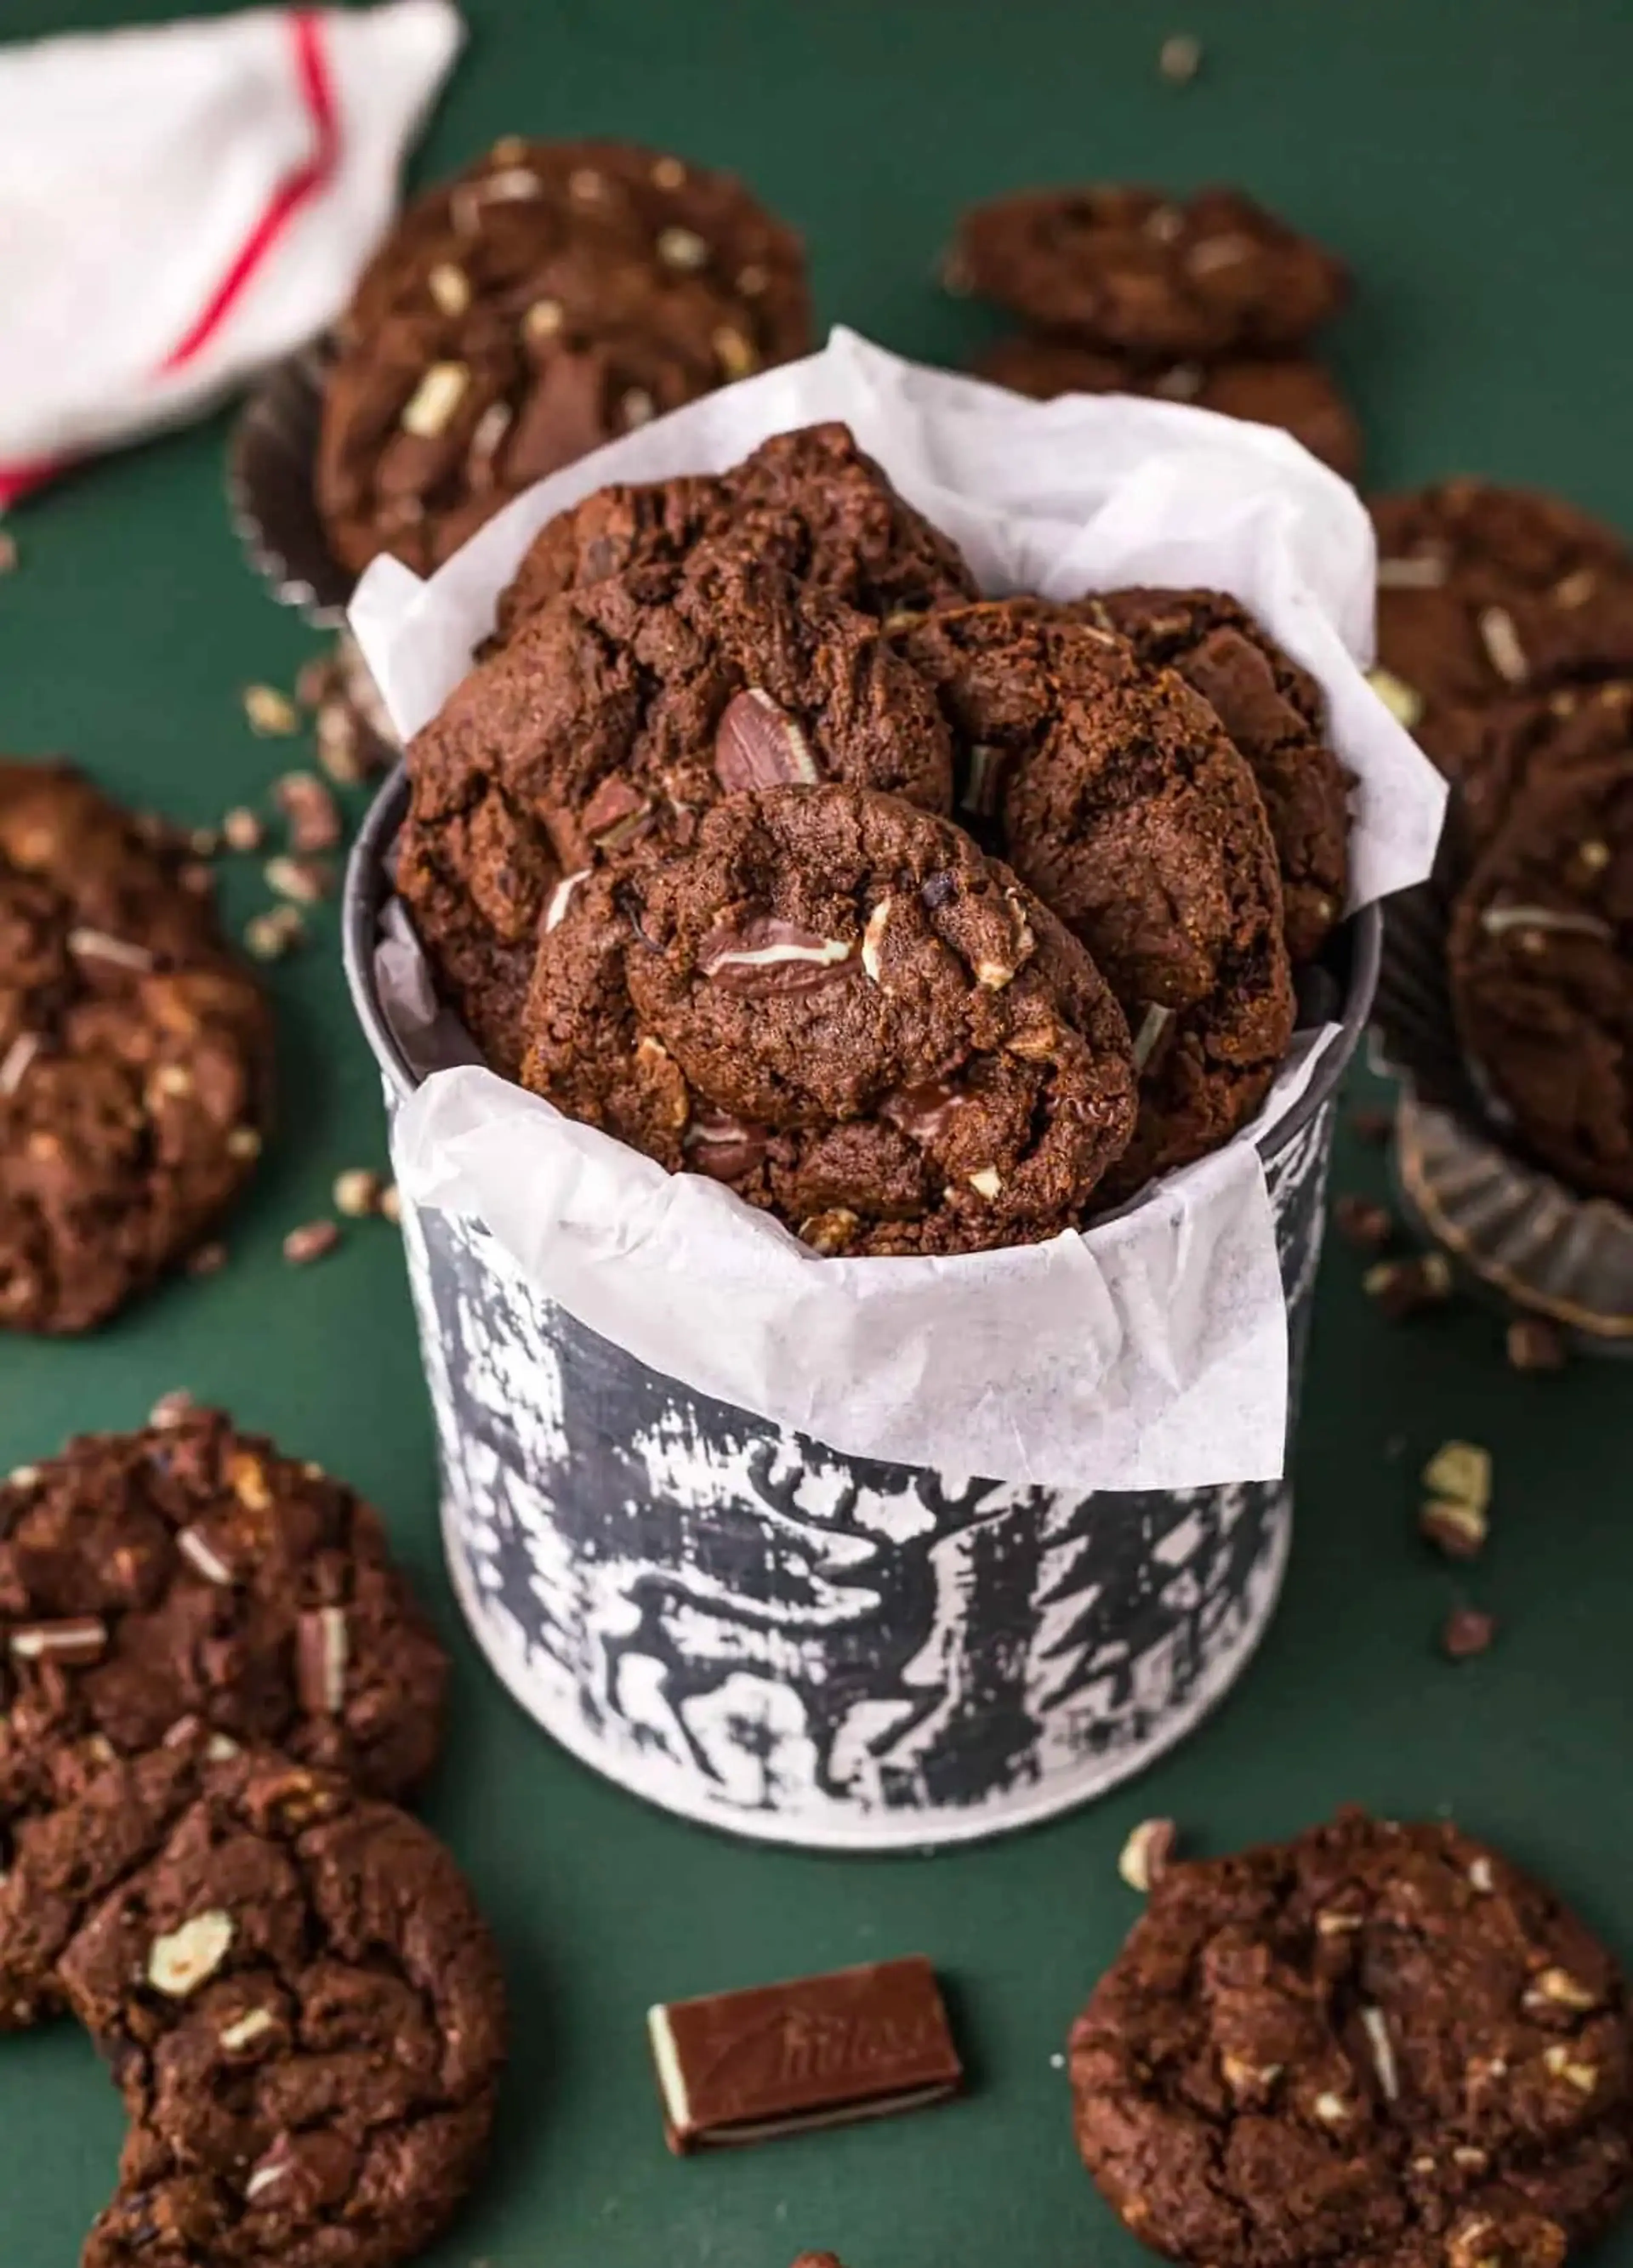 Chocolate Andes Mint Cookies